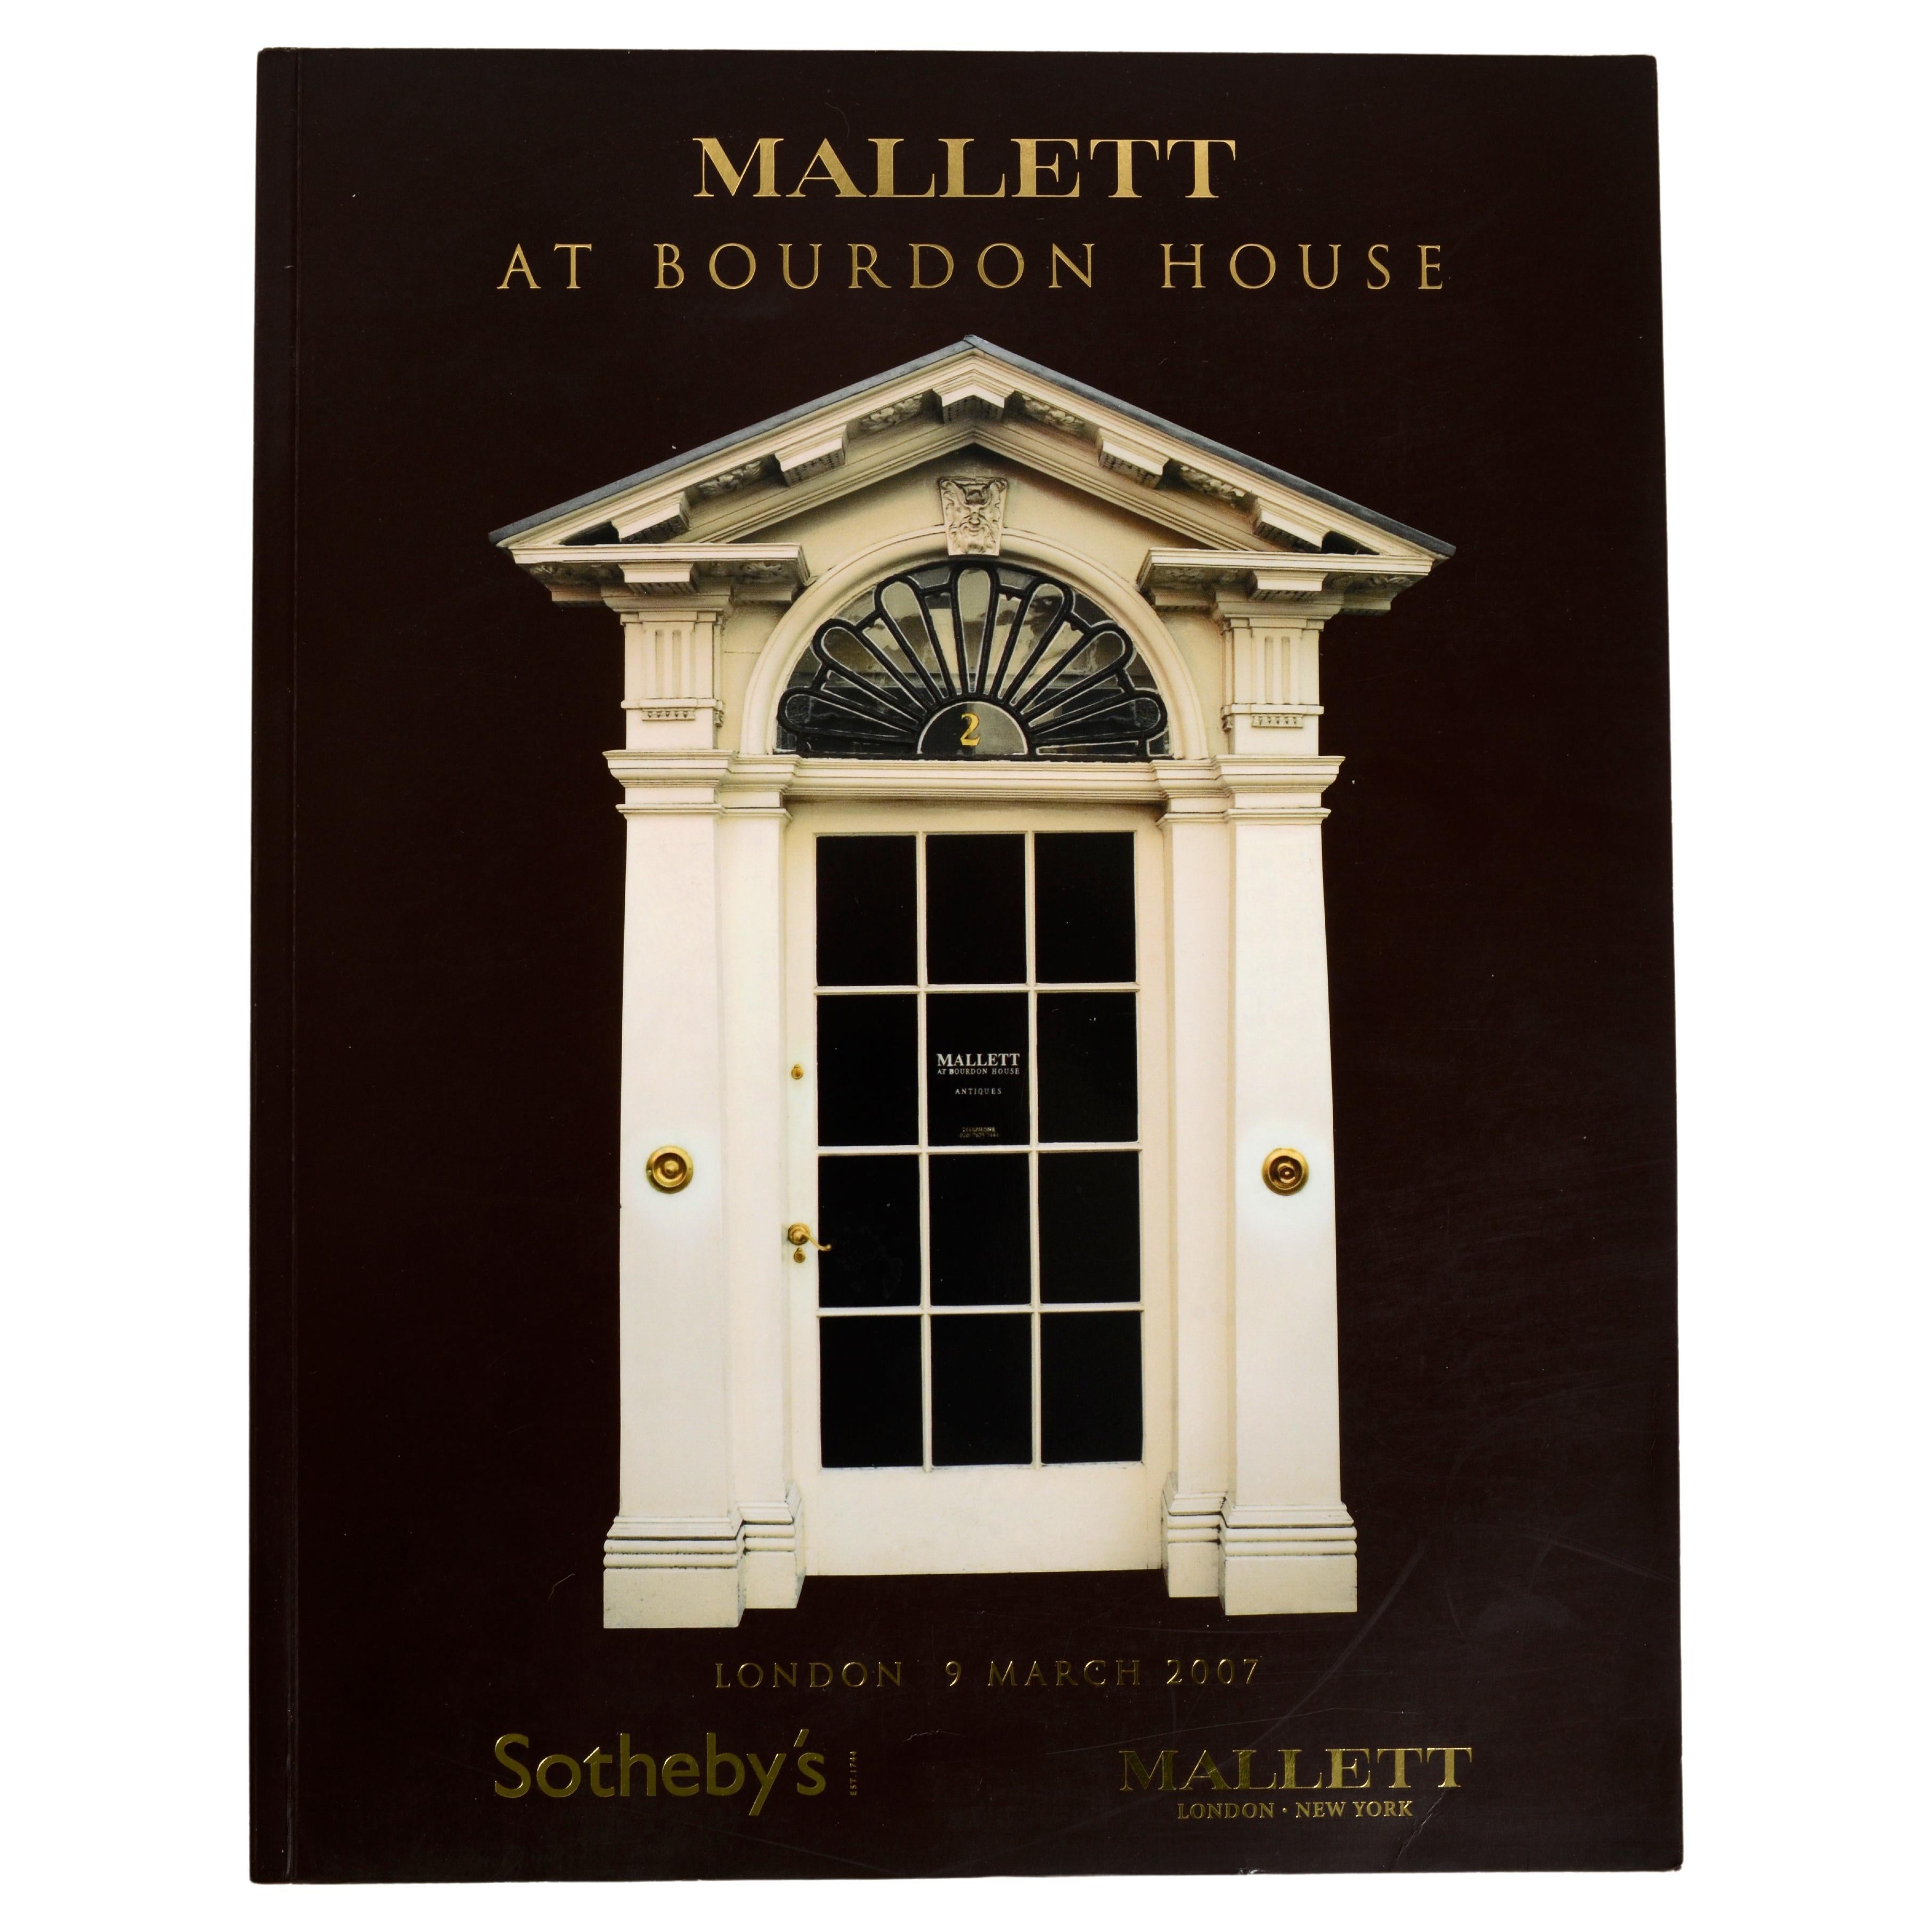 Mallet at Bourdon House, London March 9, 2007, Sotheby's For Sale